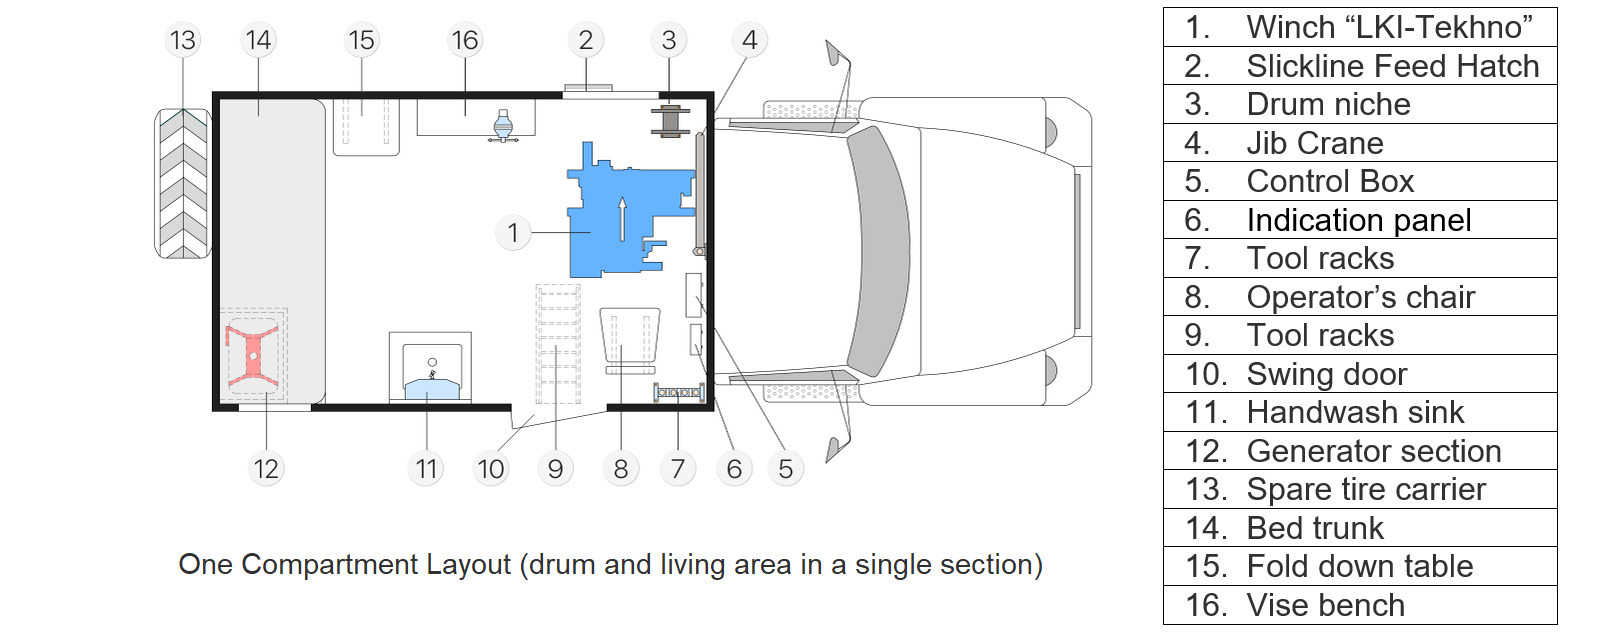 One Compartment Layout (drum and living area in a single section)